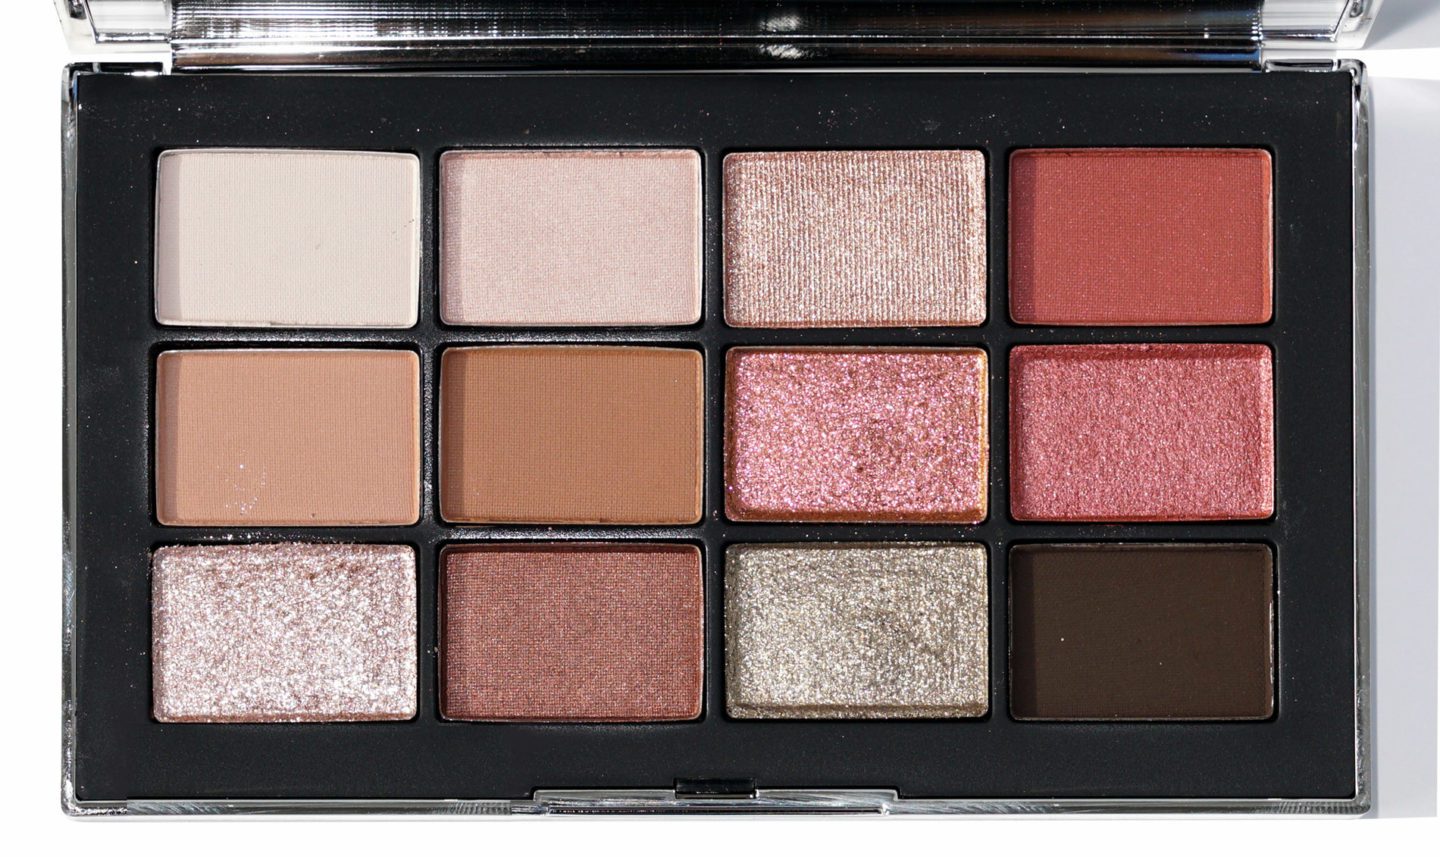 NARS NARSissist Wanted Eyeshadow Palette With Flash